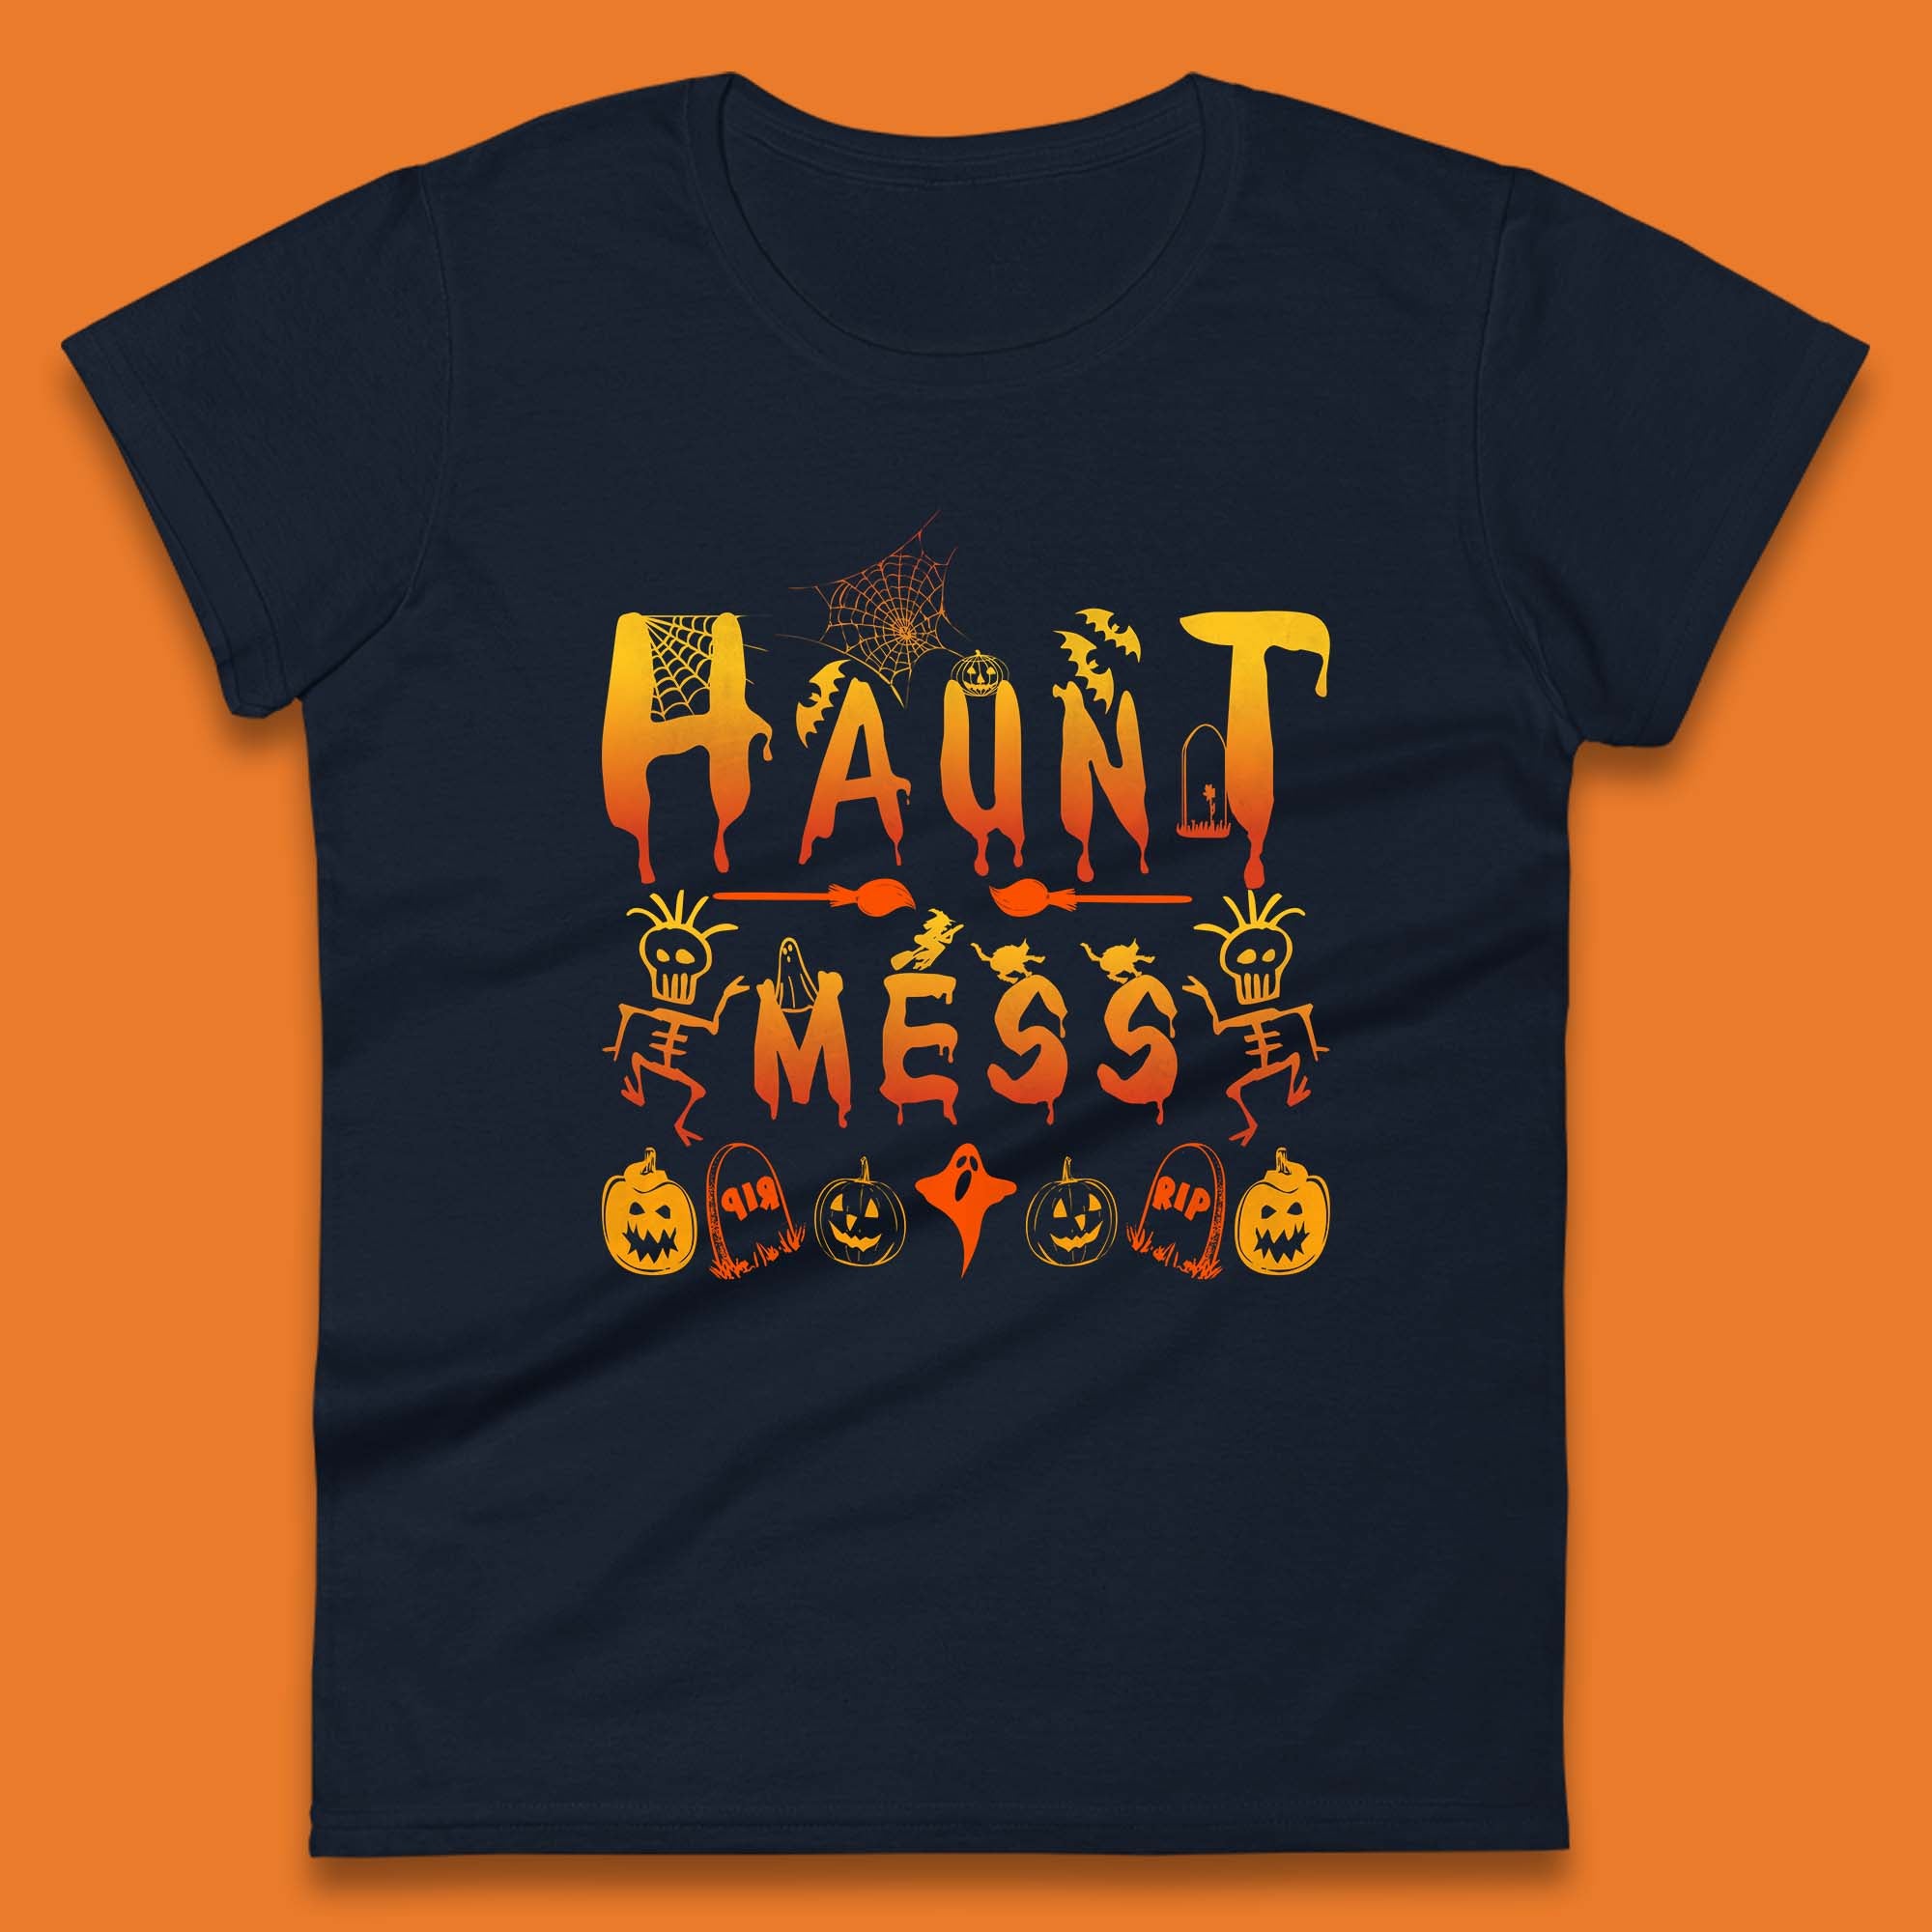 Haunt Mess Halloween Ghost Horror Scary Spooky Ghost Costume Womens Tee Top